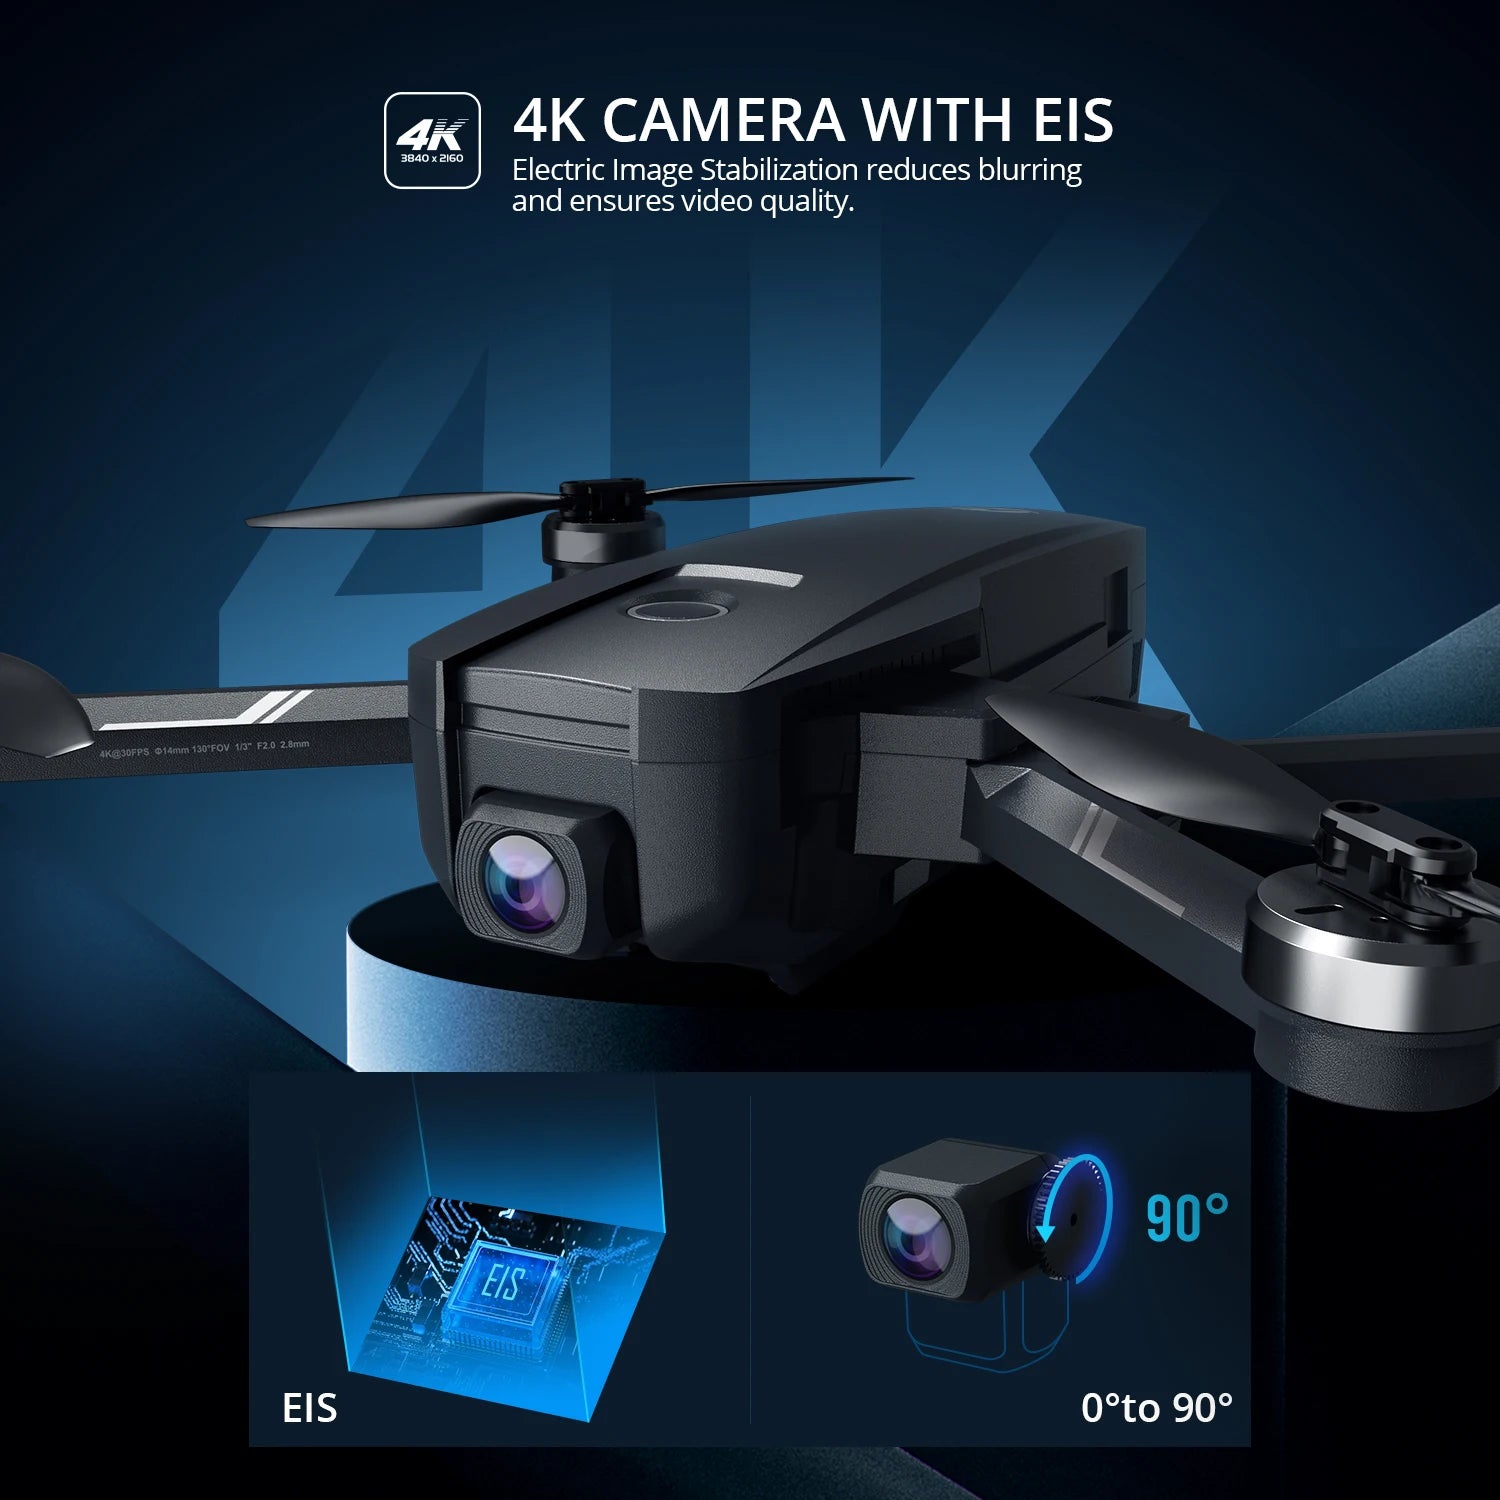 Holy Stone HS720E Upgraded 4K HD Drone, 4K CAMERA WITH EIS 3840* 2i60 Electric Image Stabilization